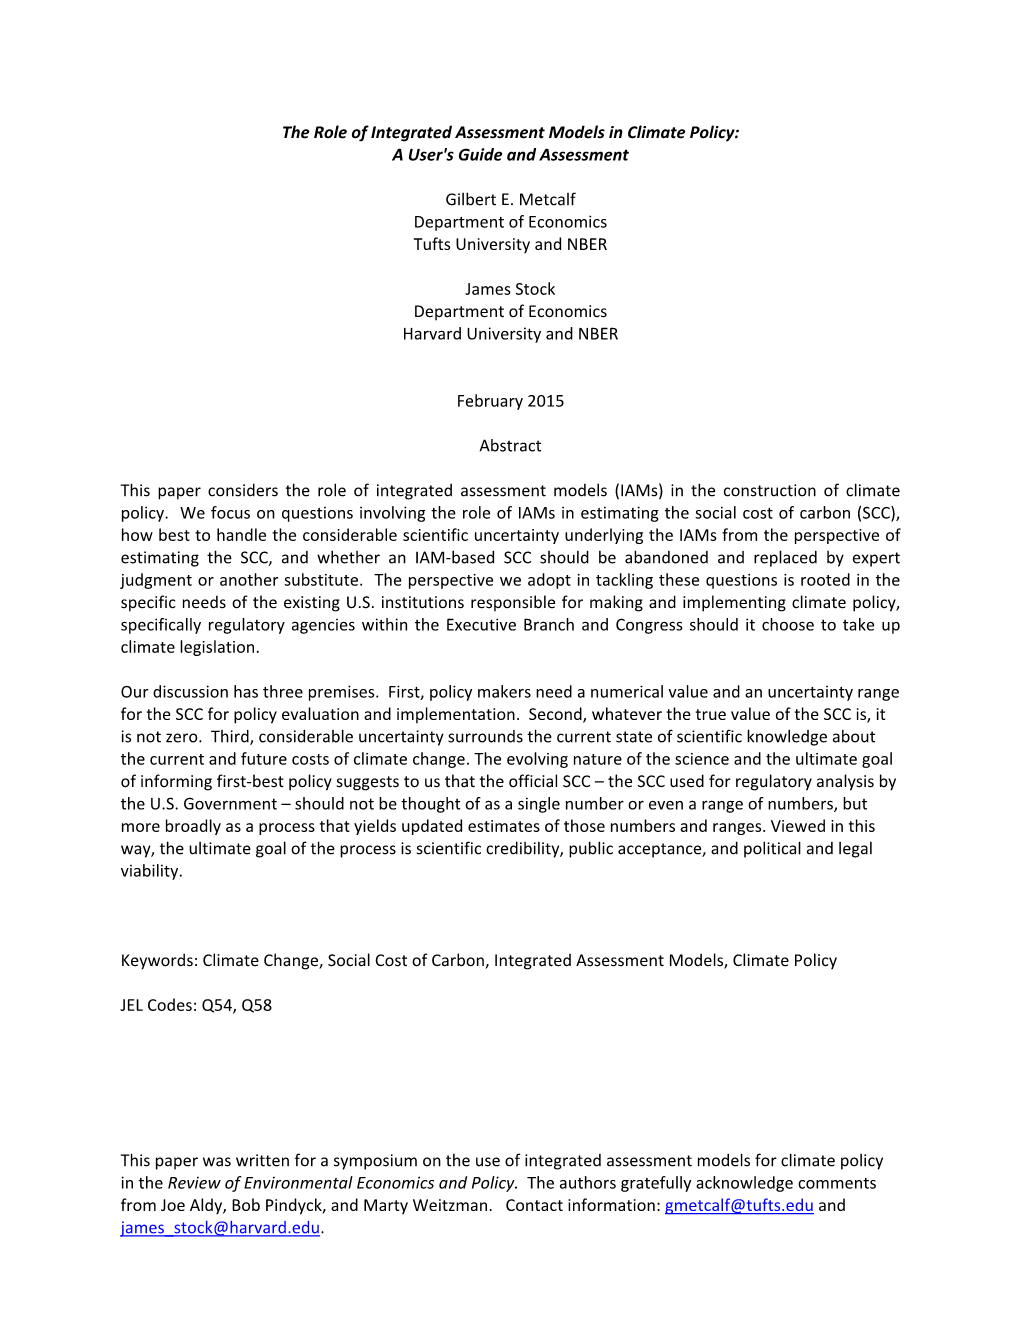 This Paper Was Written for a Symposium on the Use of Integrated Assessment Models for Climate Policy in the Review of Environmental Economics and Policy